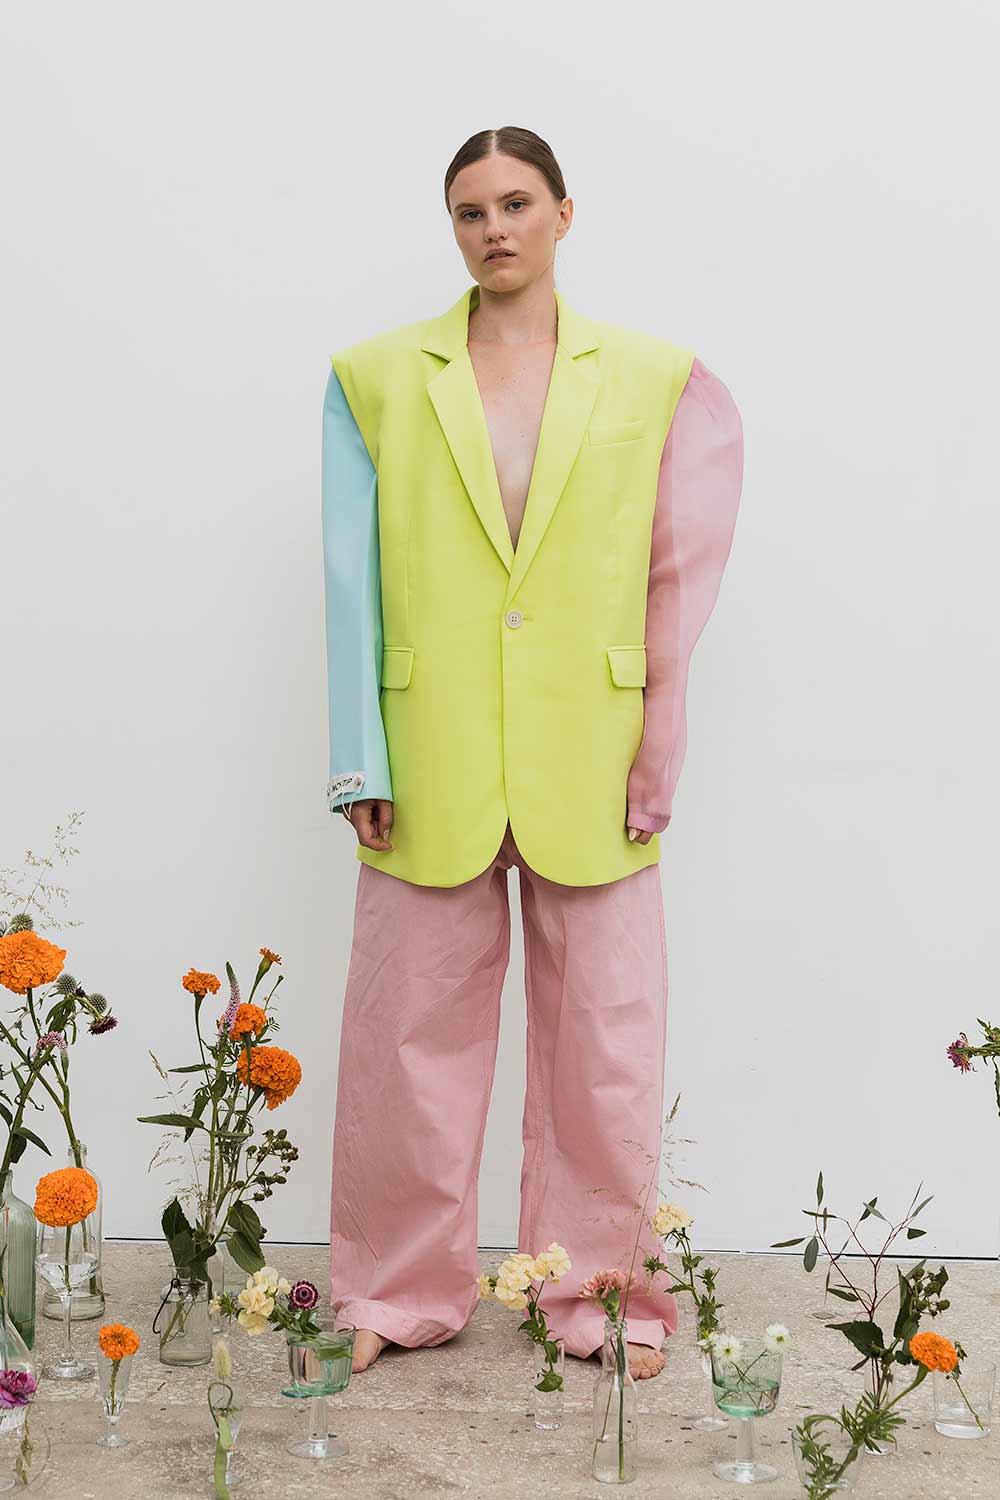 Jacket-constructor lime, mint blue, pink organza fron view